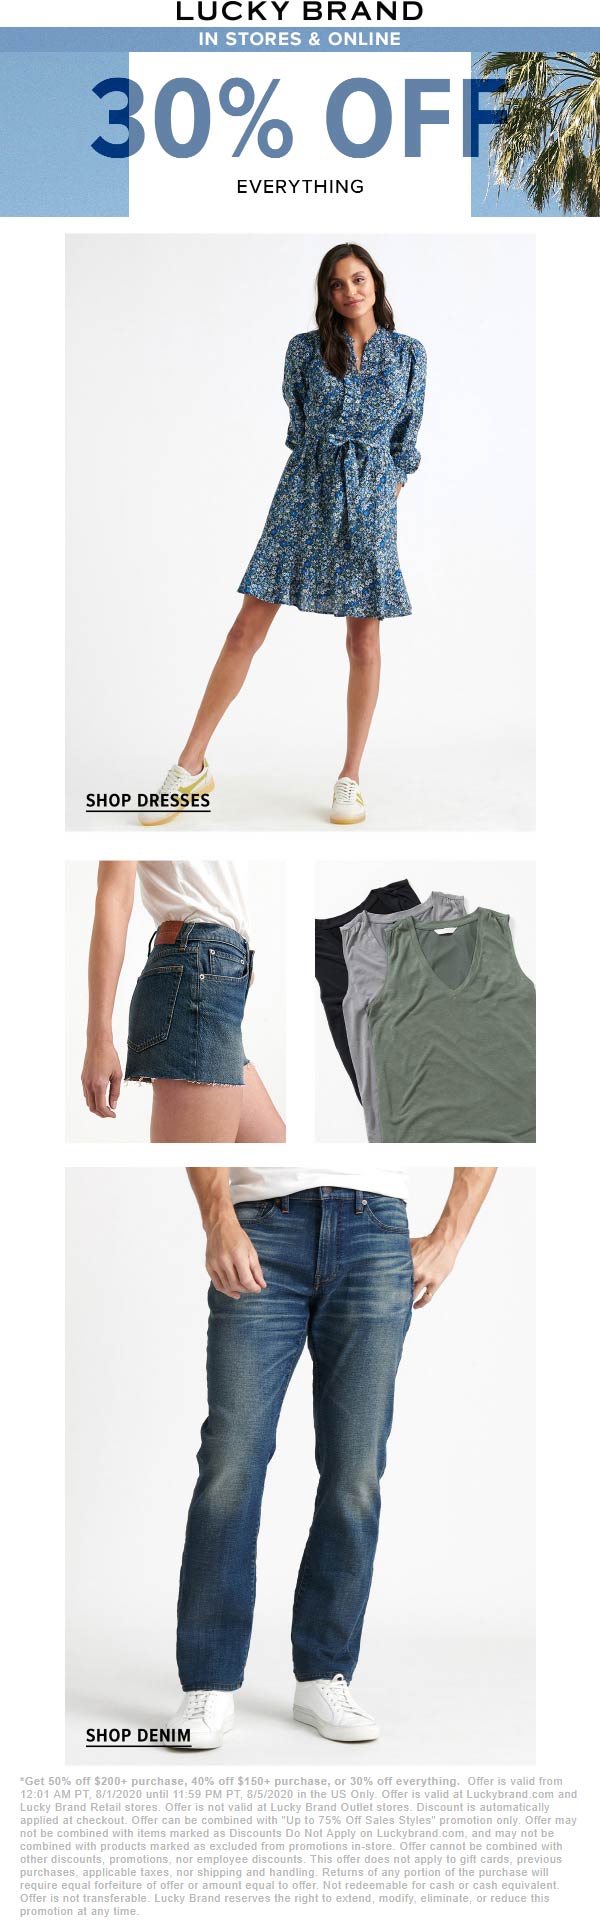 Lucky Brand stores Coupon  30% off everything & 50% off $200+ at Lucky Brand, ditto online #luckybrand 